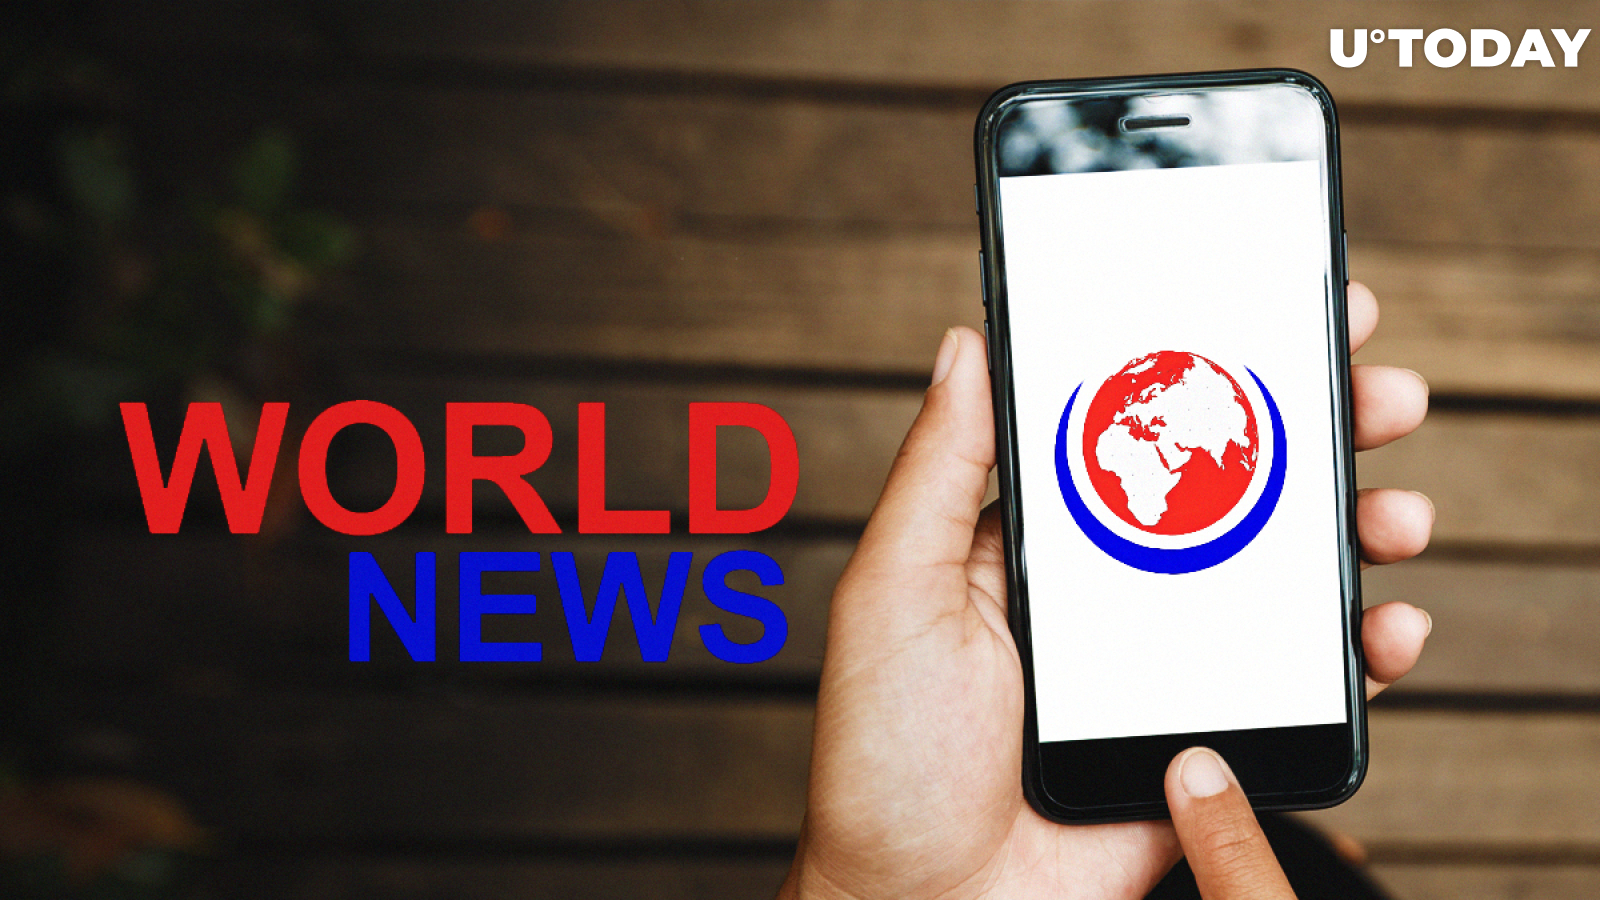 U.Today Newsfeed Now Available Via World News Android App